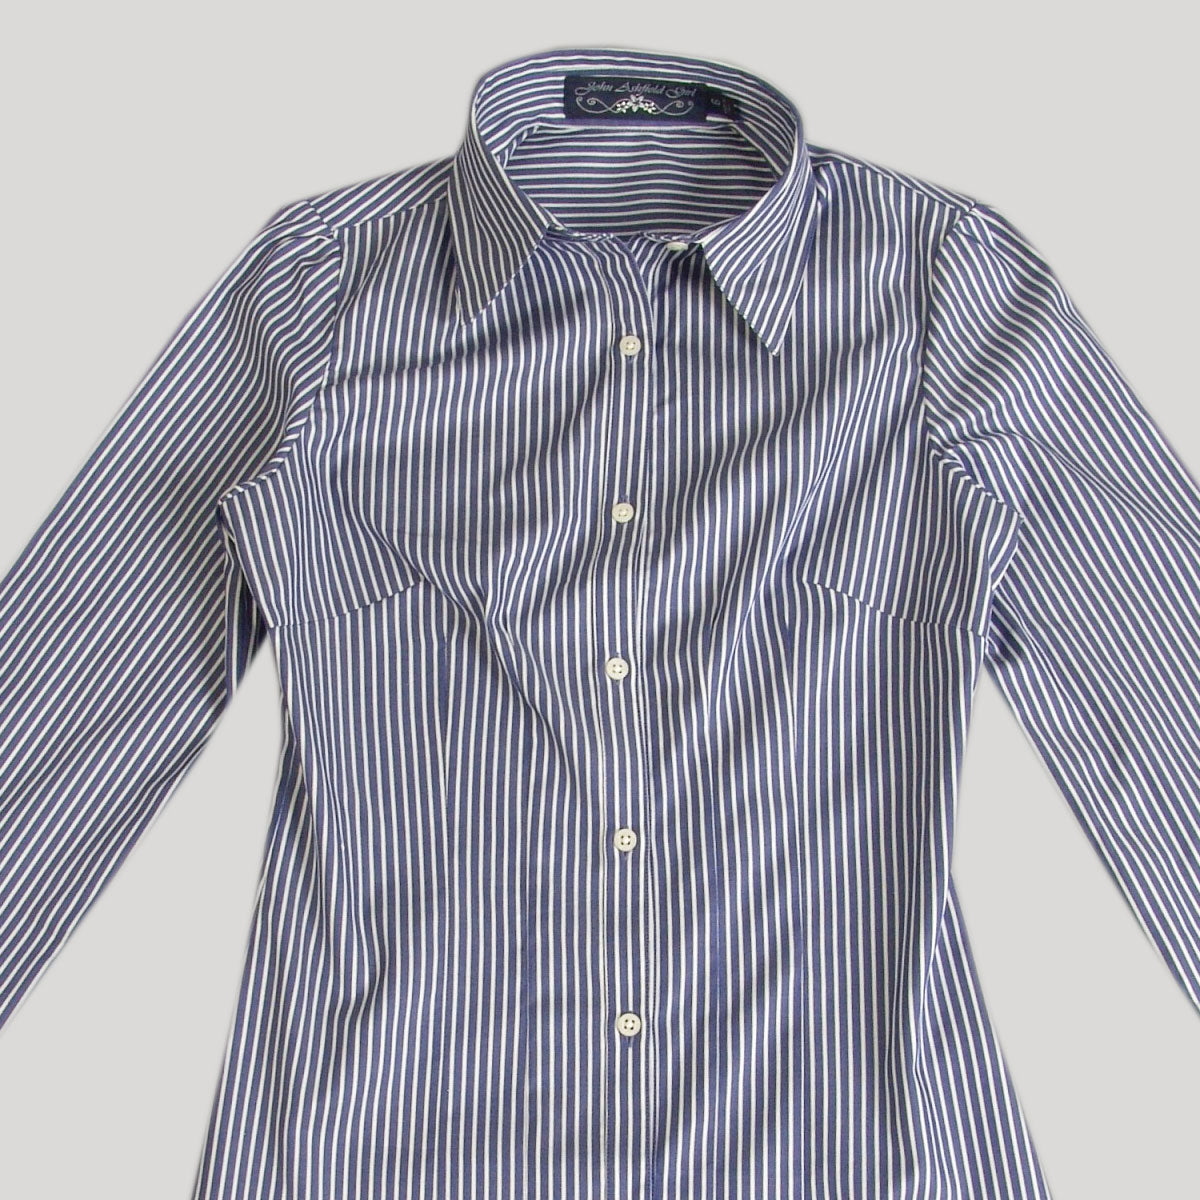 Slim Fit Shirt for Woman